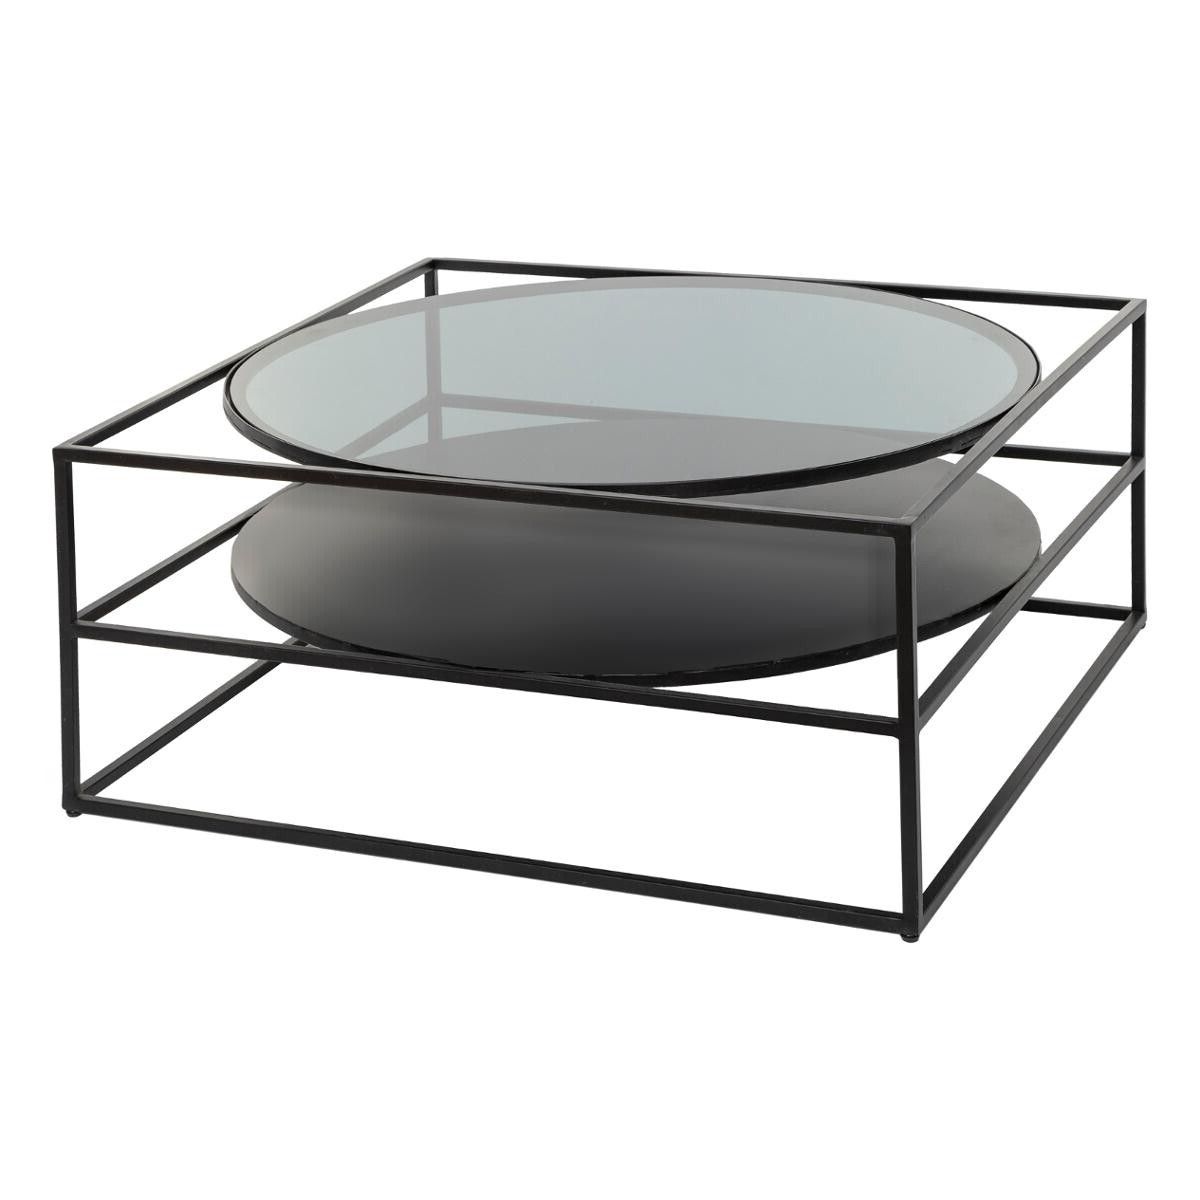 Yoho Coffee Table With Tempered Glass Top 90 X 90 Cm – Atmosphera Official  Website Throughout Most Current Tempered Glass Coffee Tables (View 4 of 20)